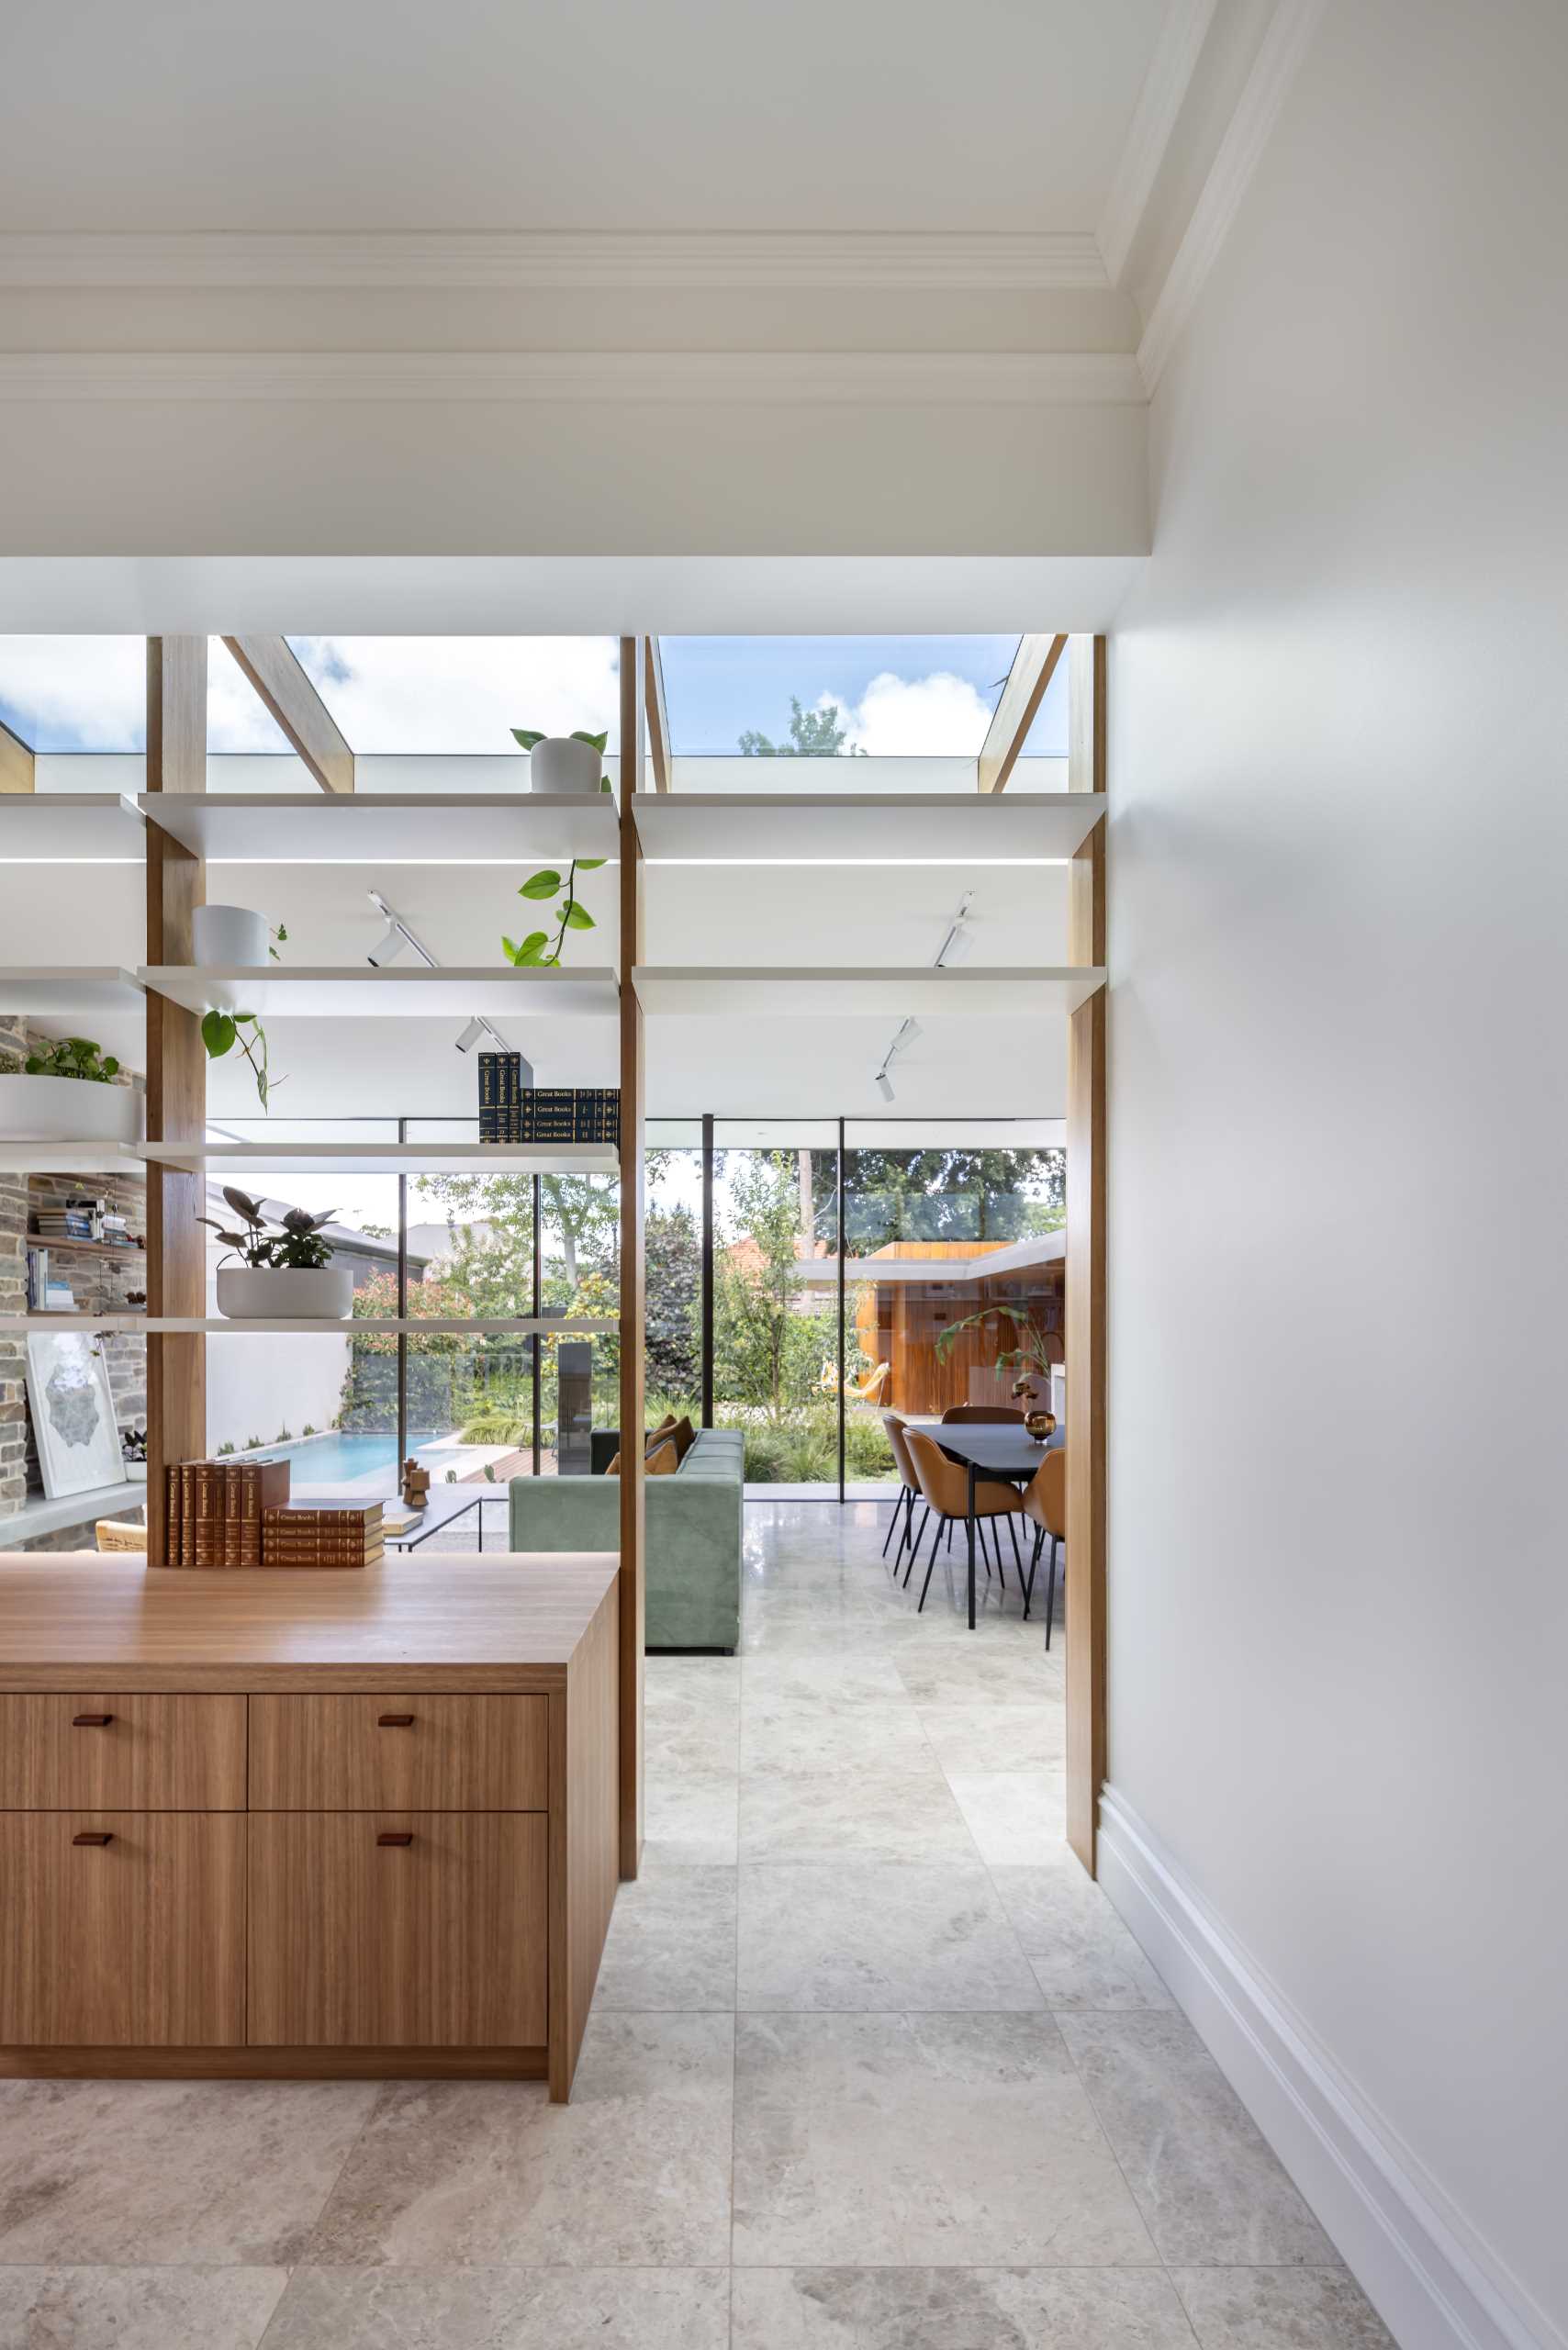 An open wall of shelving below a skylight separates the living room from a home office.